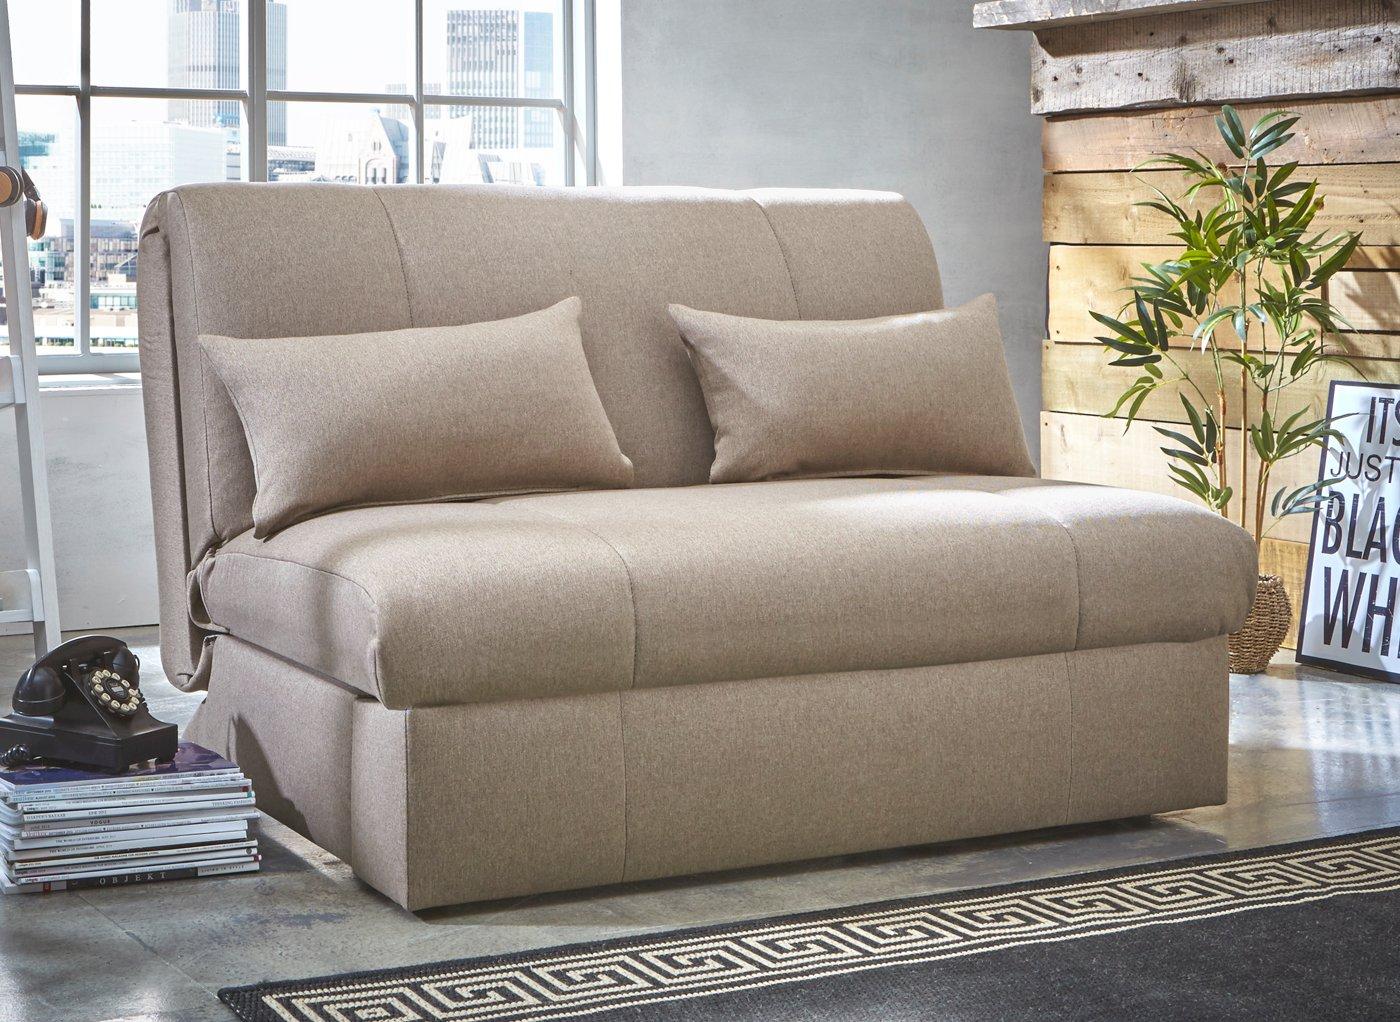 kelso double sofa bed